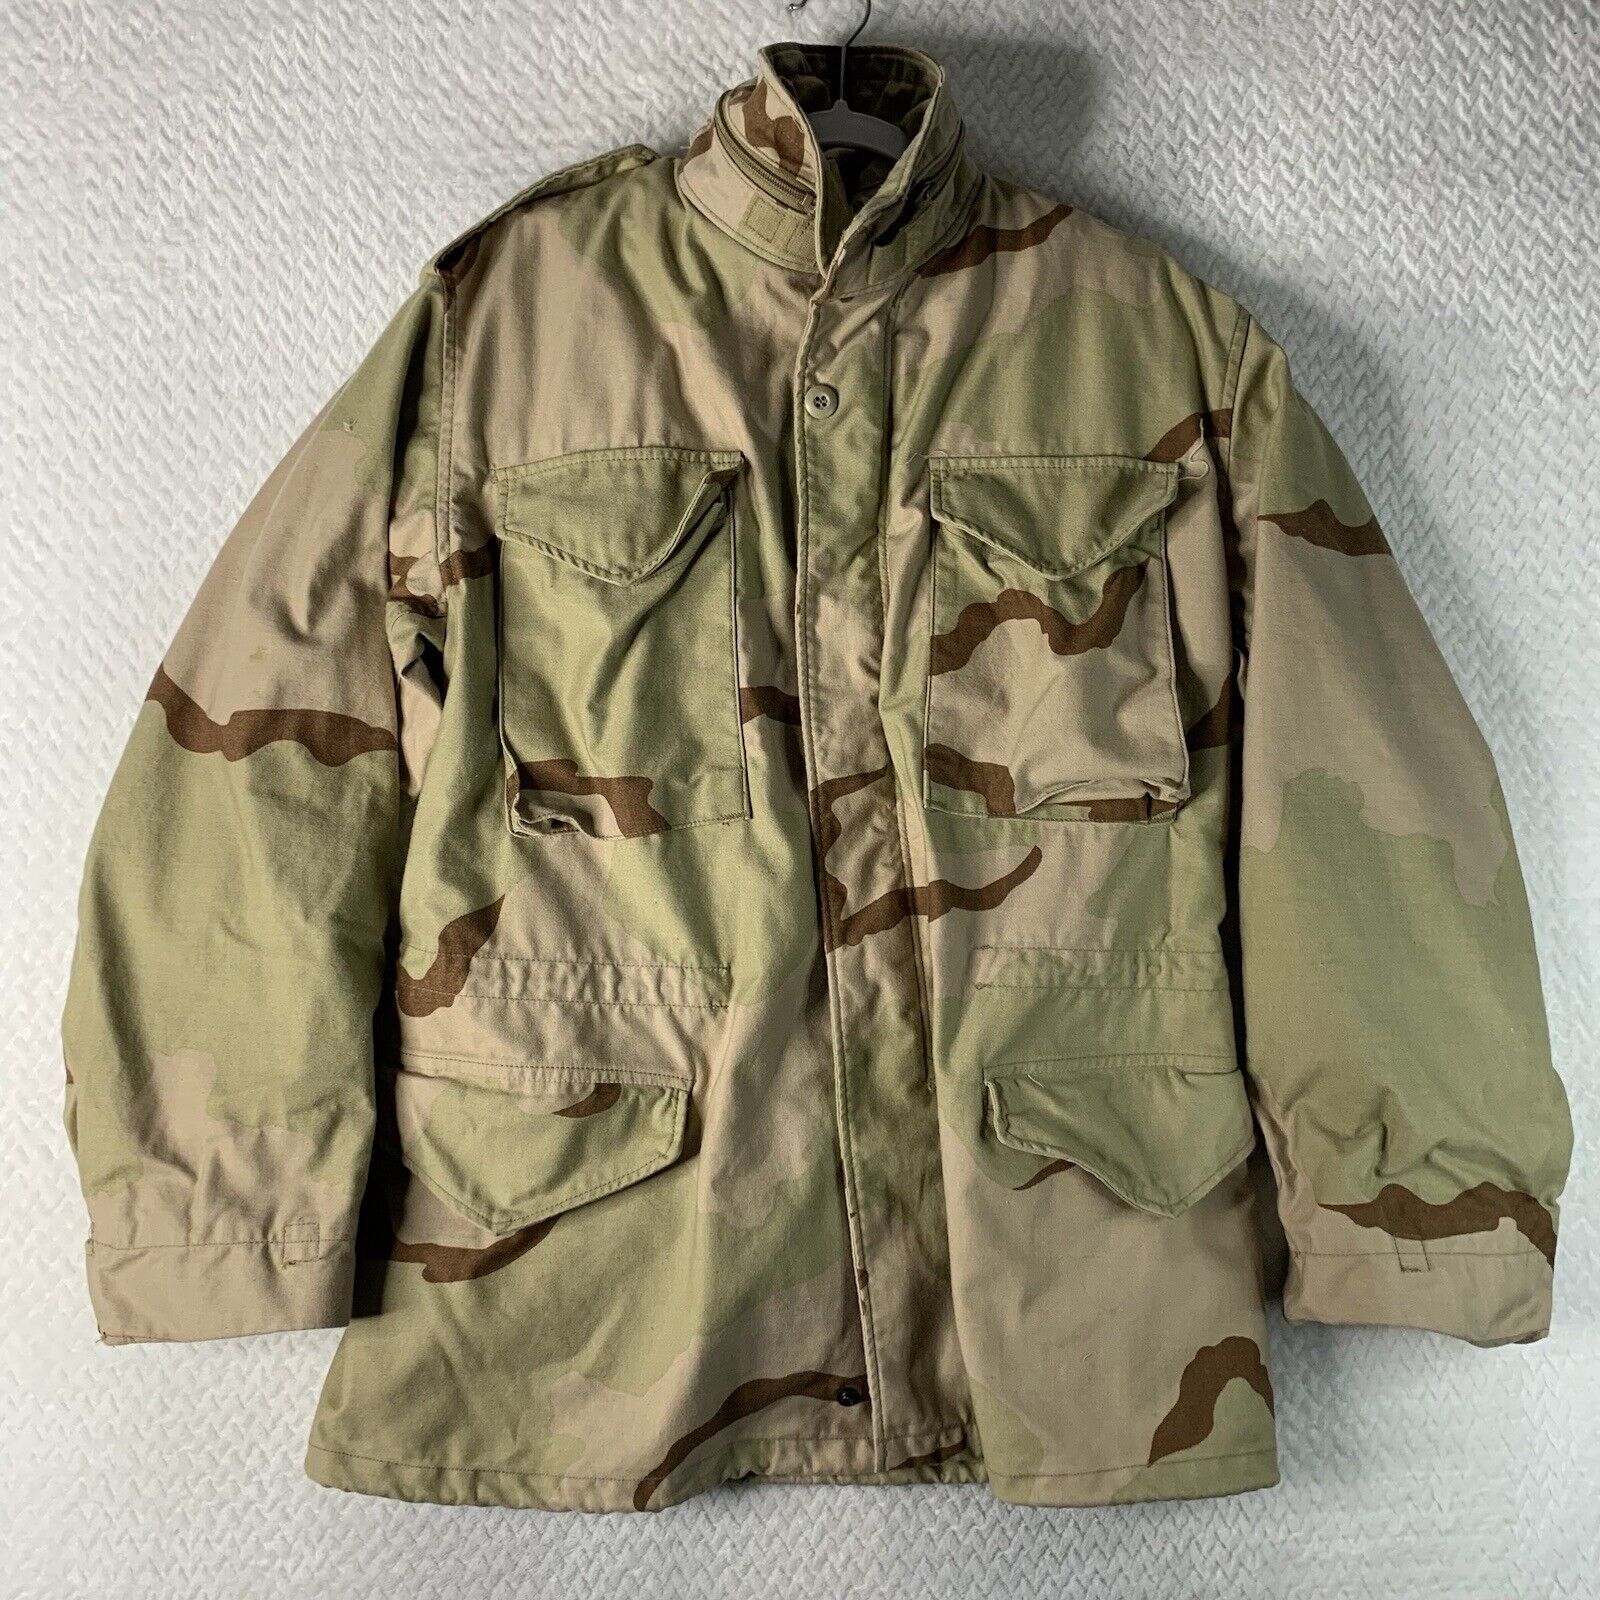 Vtg Military M65 Cold Weather Field Coat Small Regular Desert Camo 3 Way Hooded